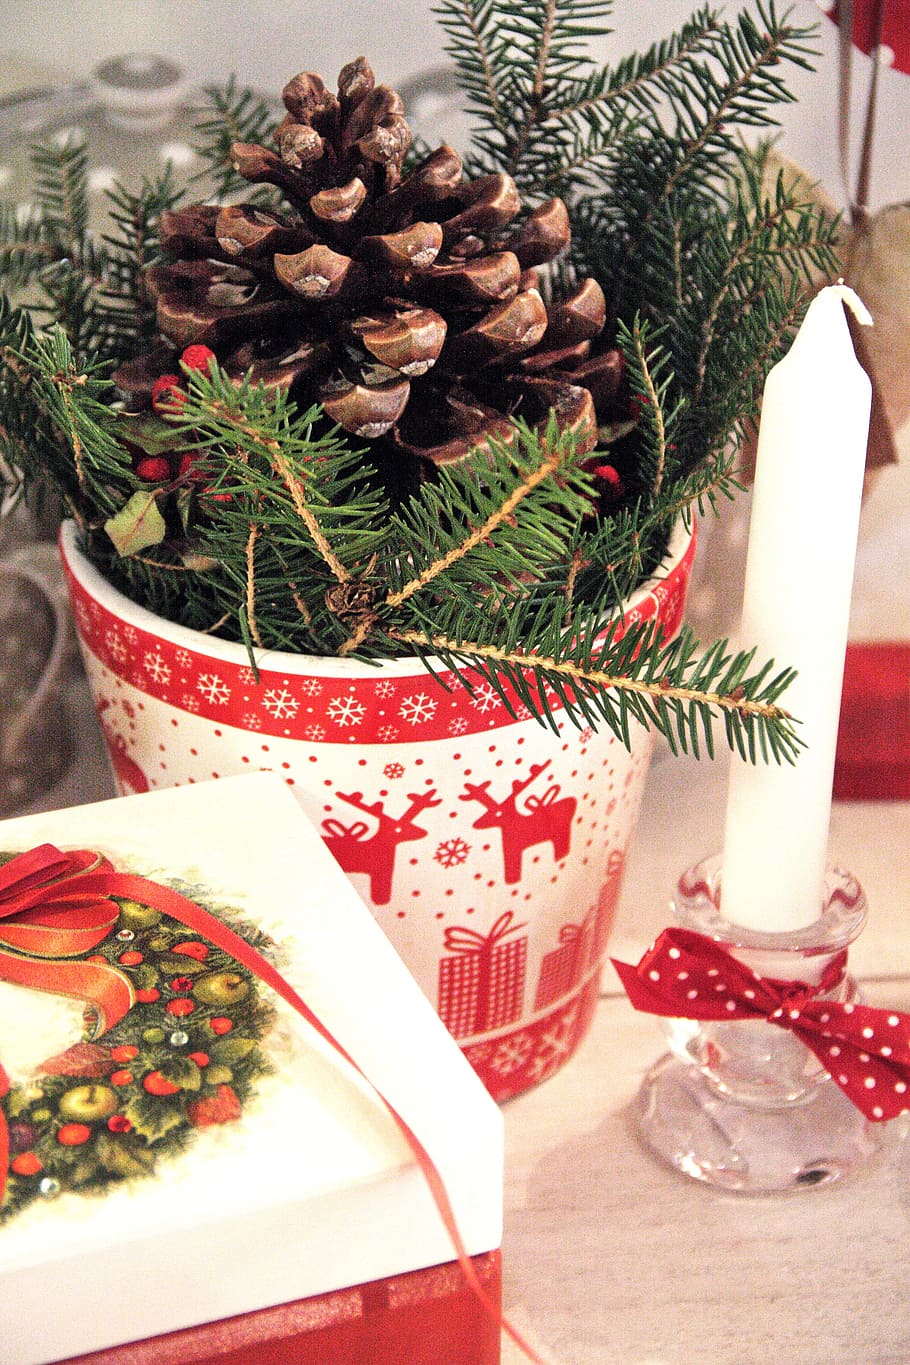 christmas, decorations, decor, festive, holidays, gifts, pine cones, candles, presents, celebration